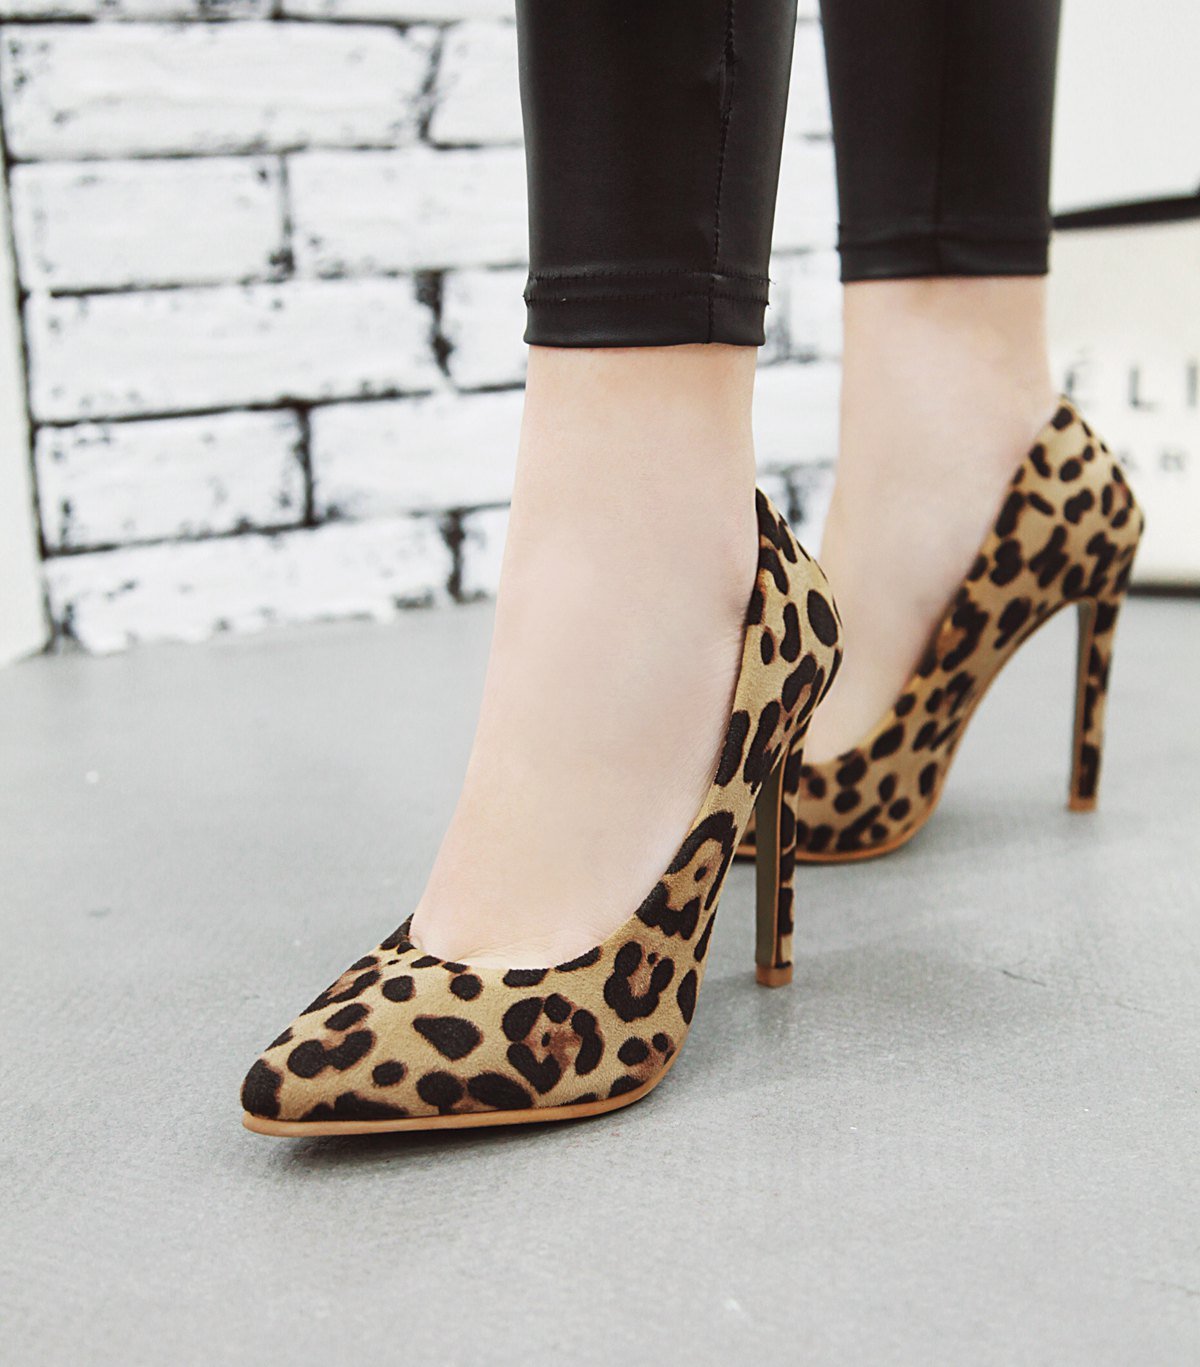 Women's Sexy Ultra-High Heeled Shallow-mouth Stiletto Pumps